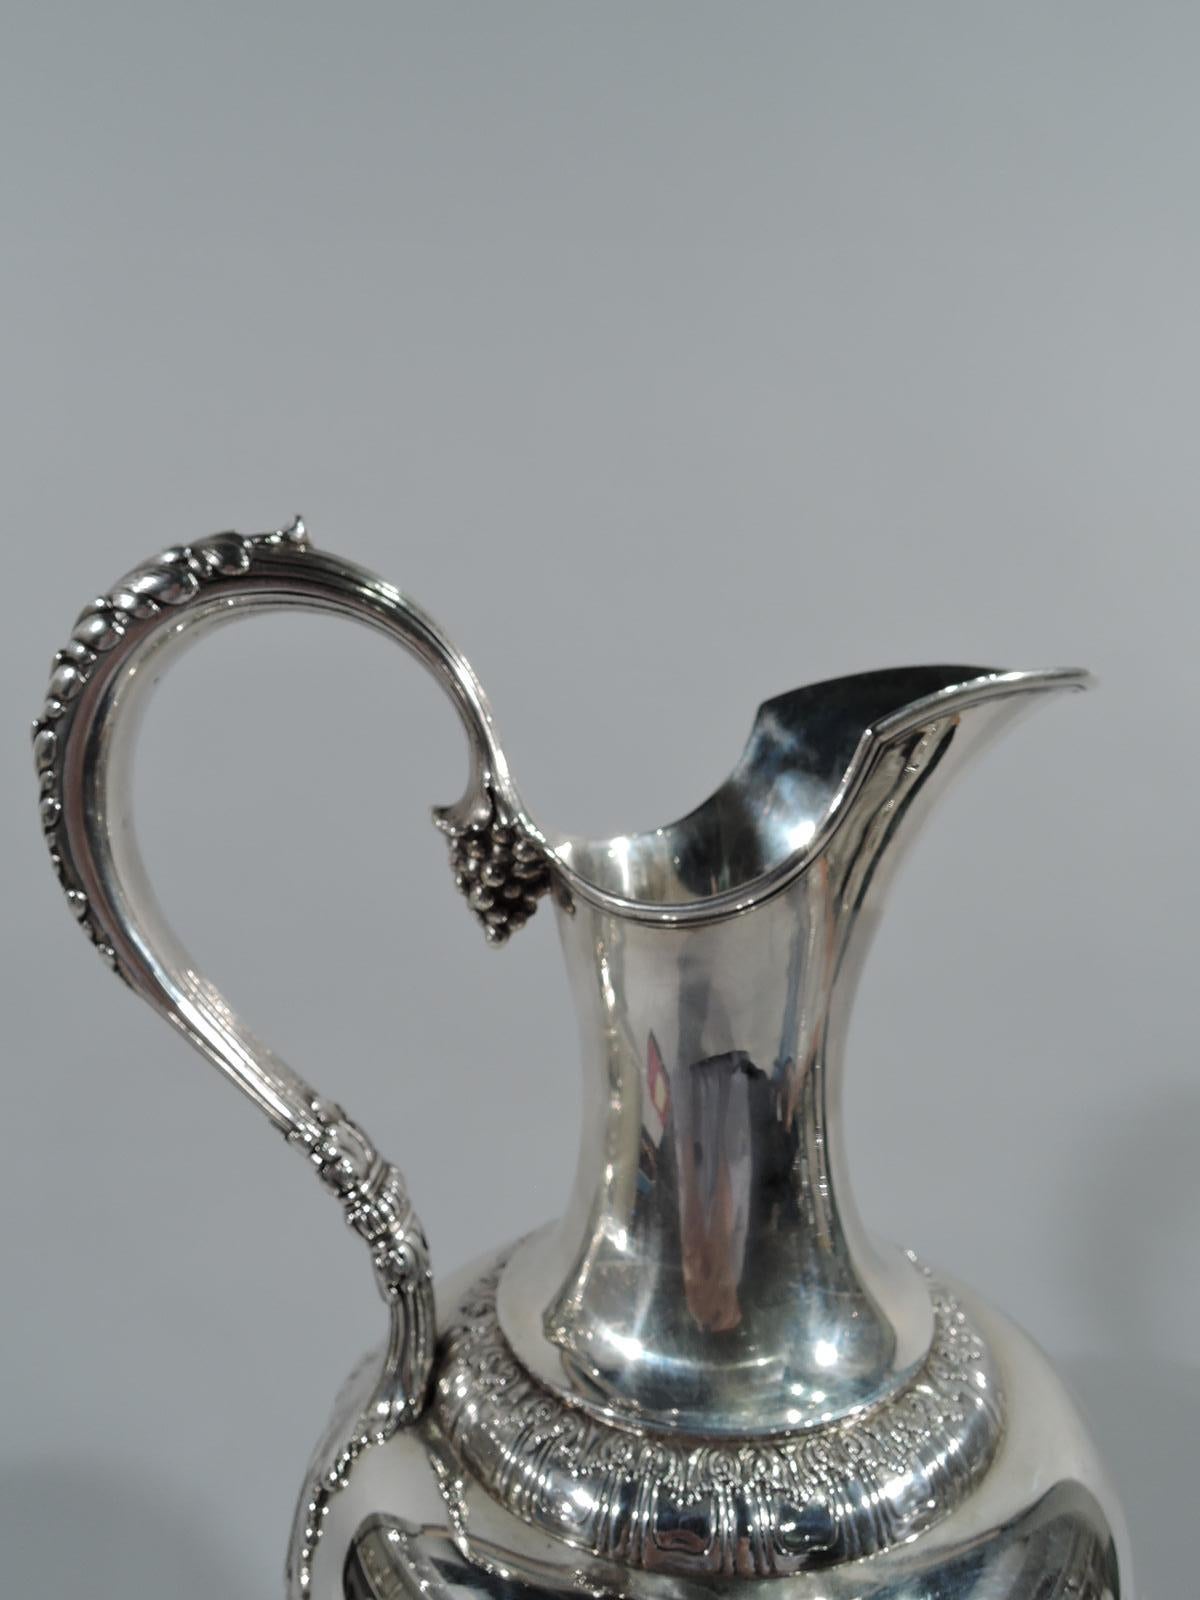 Neoclassical sterling silver ewer. Made by Tiffany in New York. Ovoid body, helmet mouth and spout, leaf-mounted and capped reeded scroll handle with grape-bunch terminal, short flanged stem, and domed foot. Body encircled with military frieze